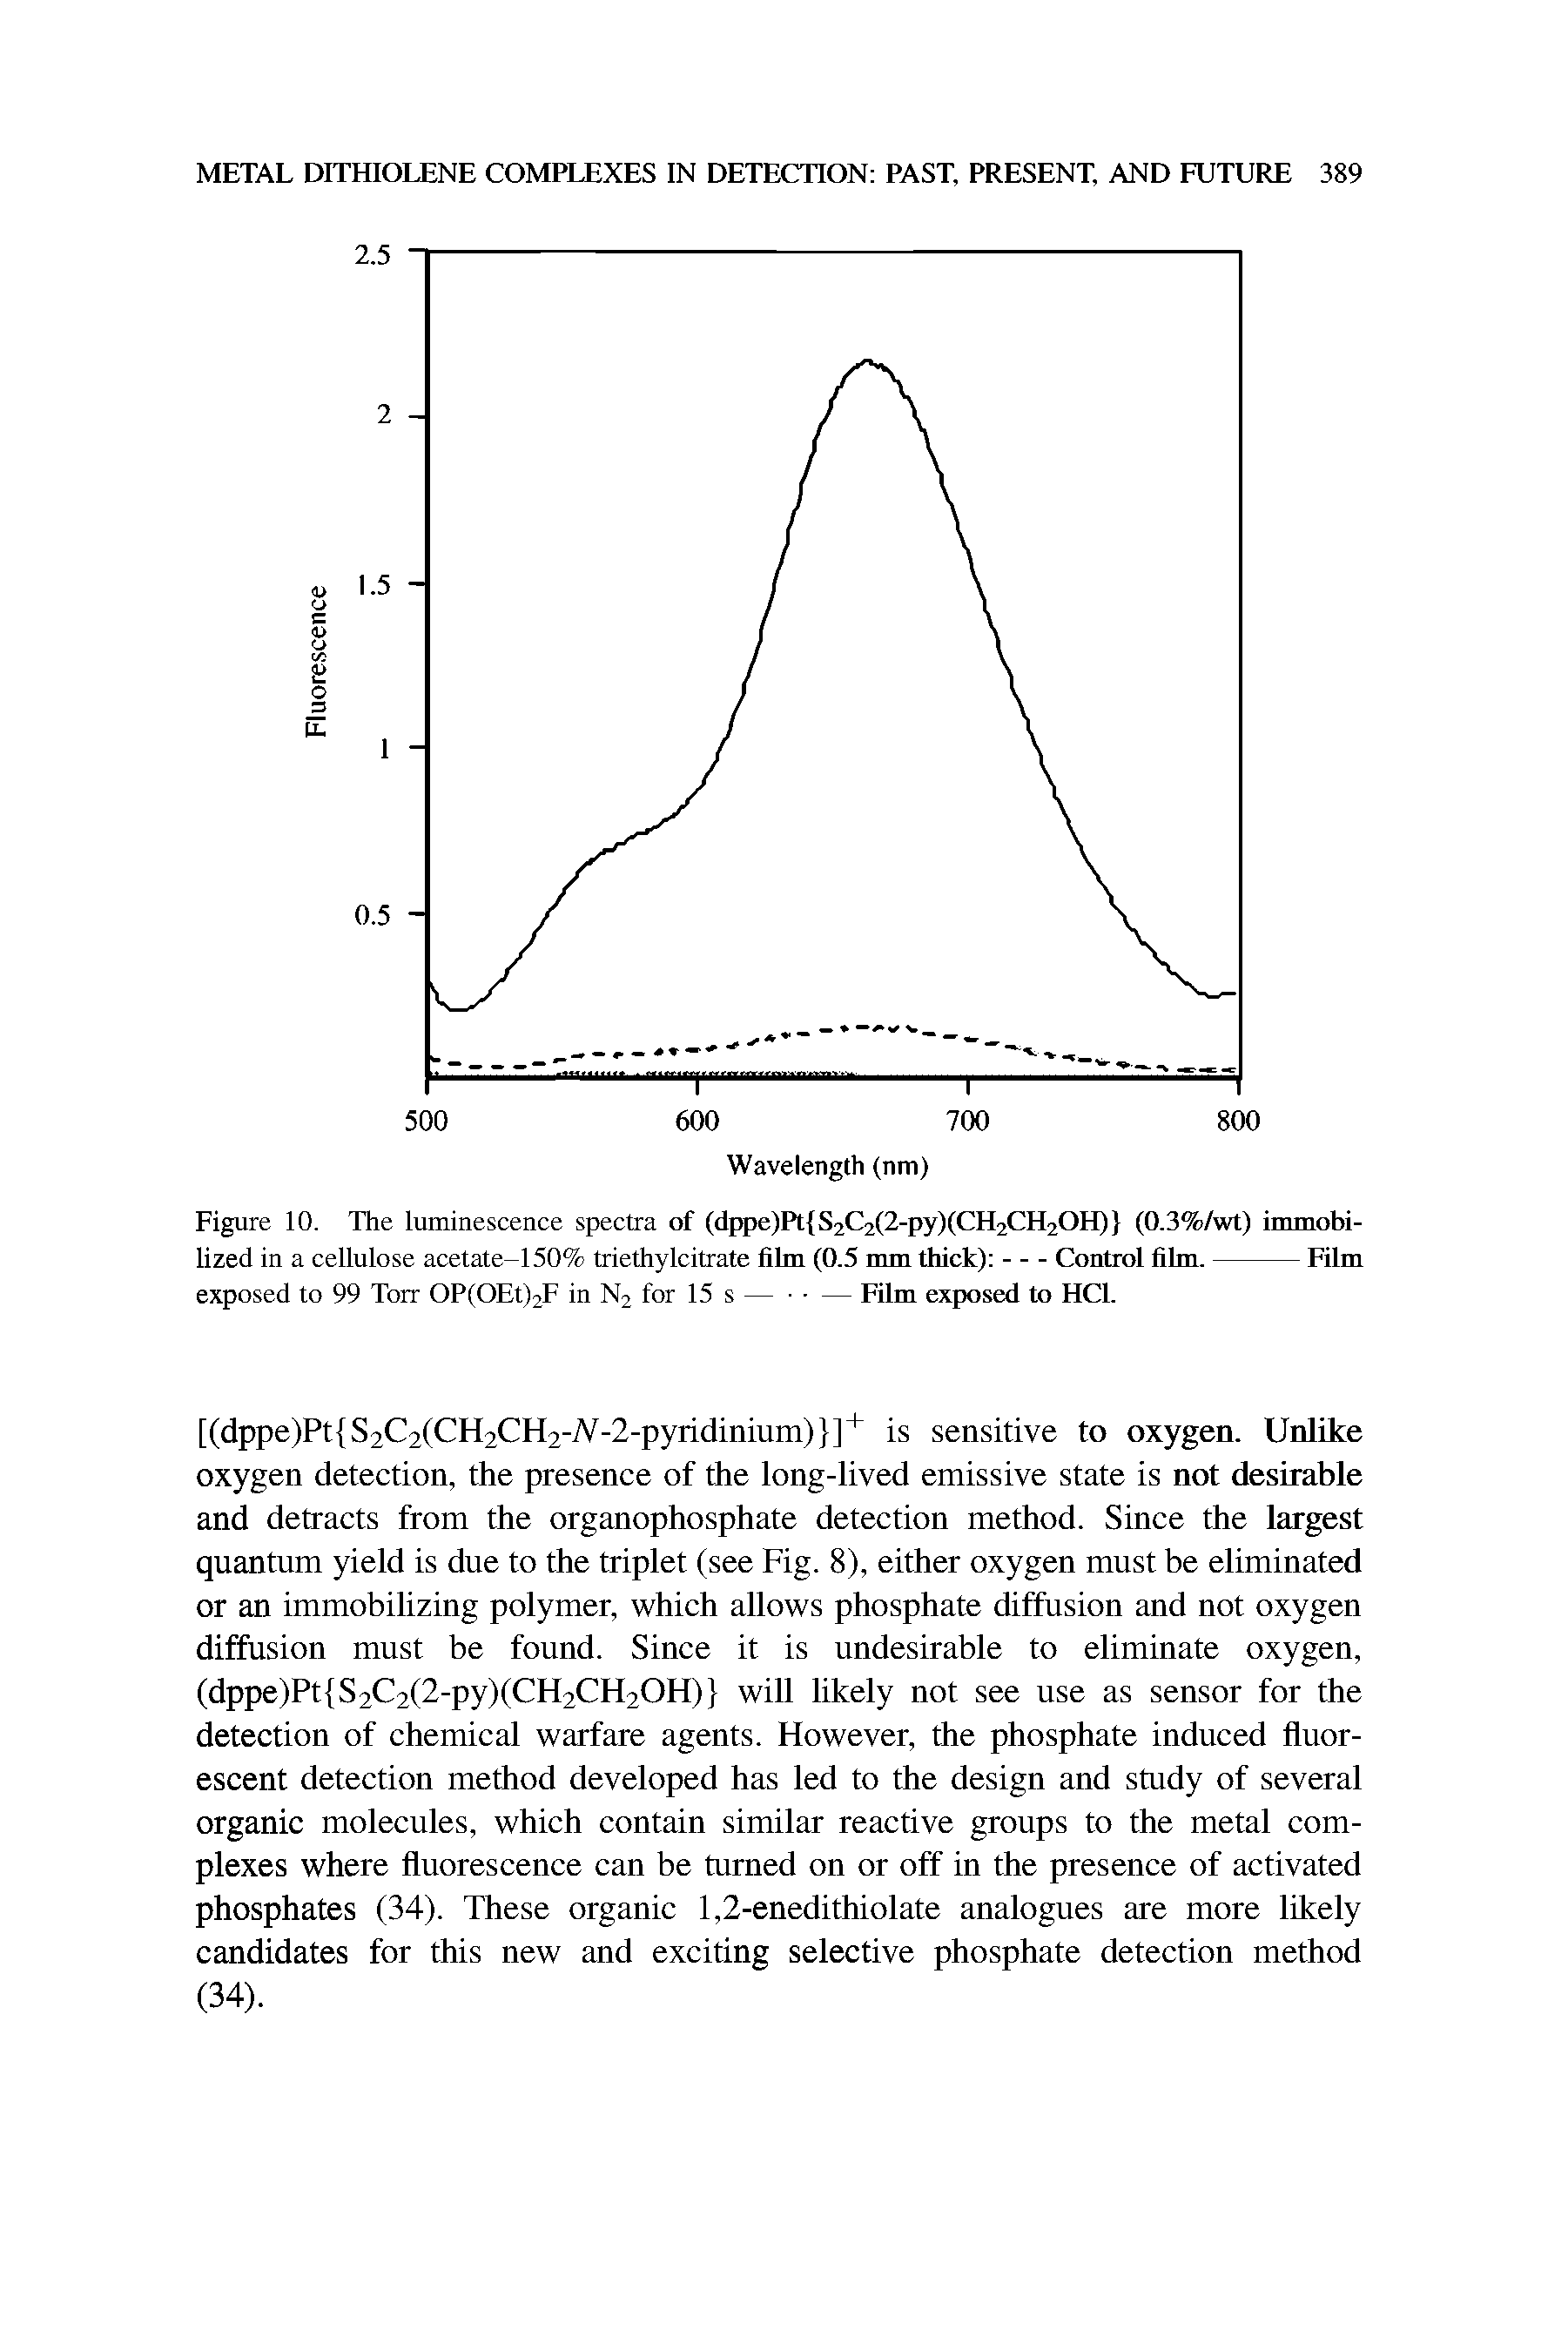 Figure 10. The luminescence spectra of (dppe)Pt S2C2(2-py)(CH2CH2OH) (0.3%/wt) immobilized in a cellulose acetate-150% triethylcitrate film (0.5 mm thick) -Control film.-Film...